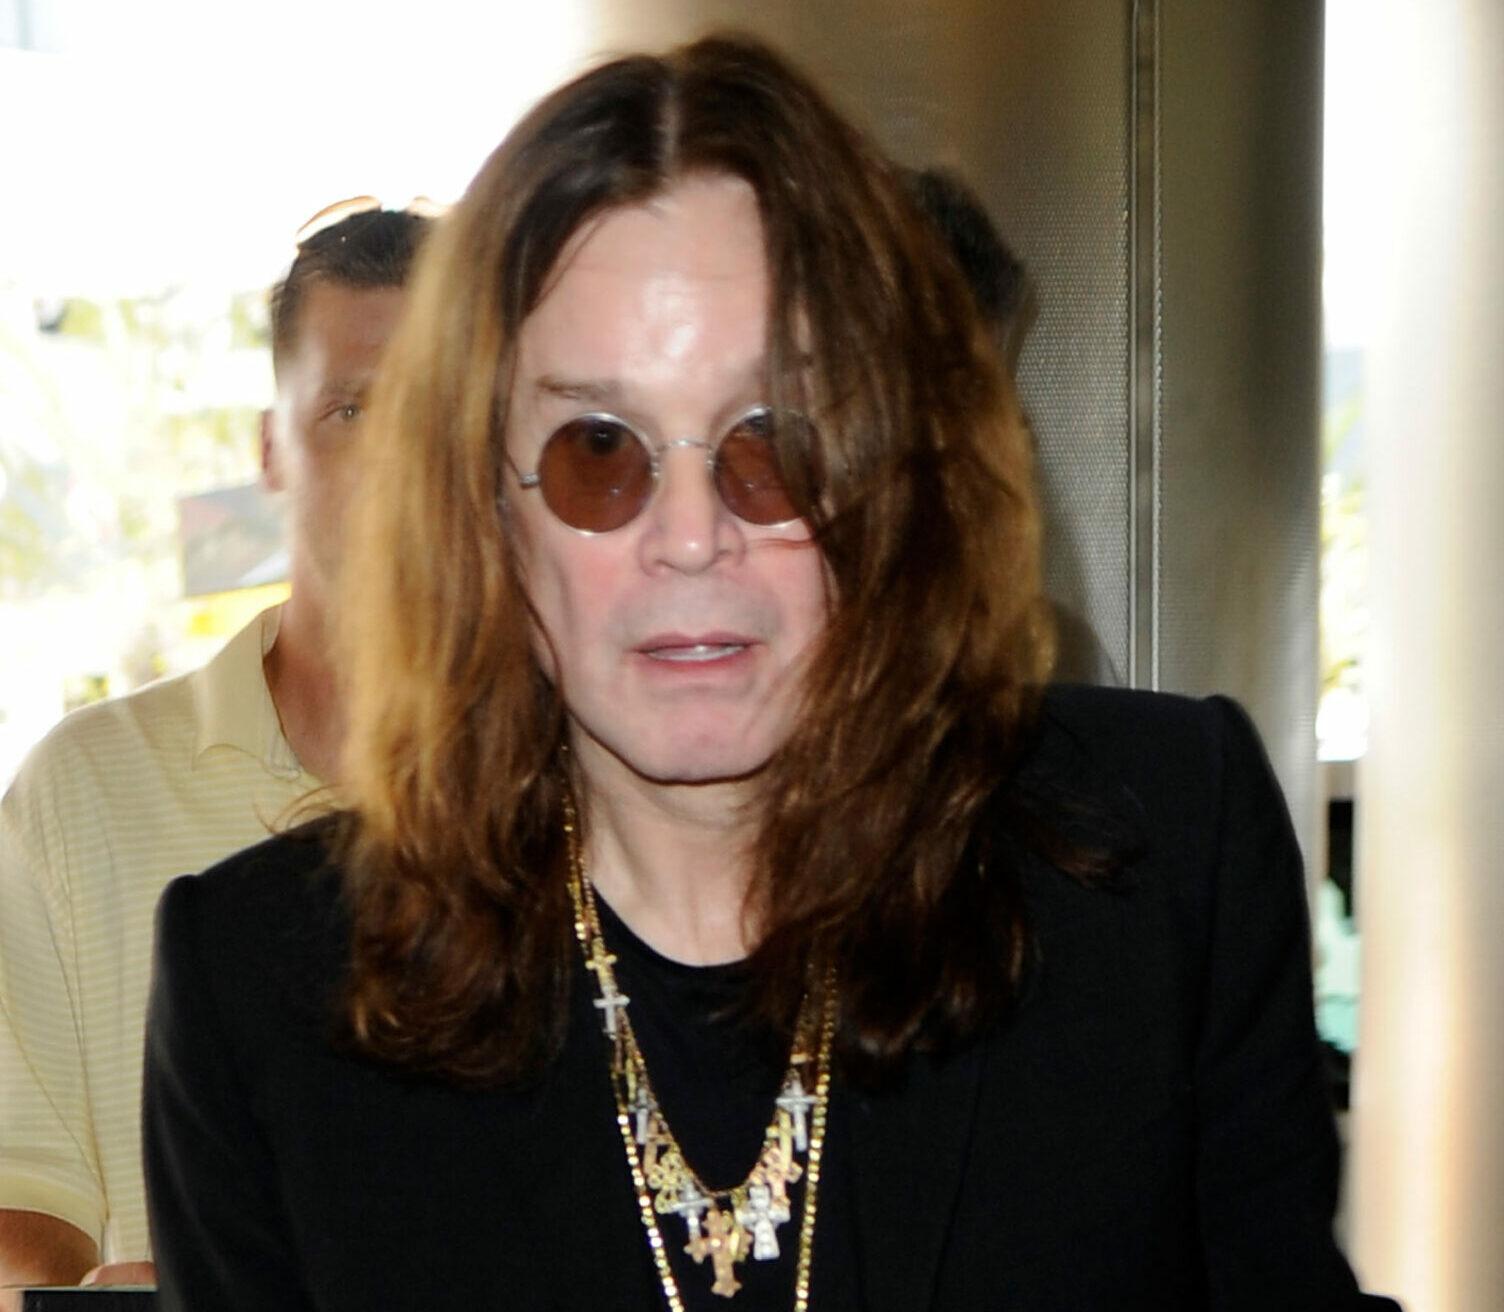 Ozzy Osbourne and wife Sharon Osbourne and daughter Kelly Osbourne arrive at Miami International Airport